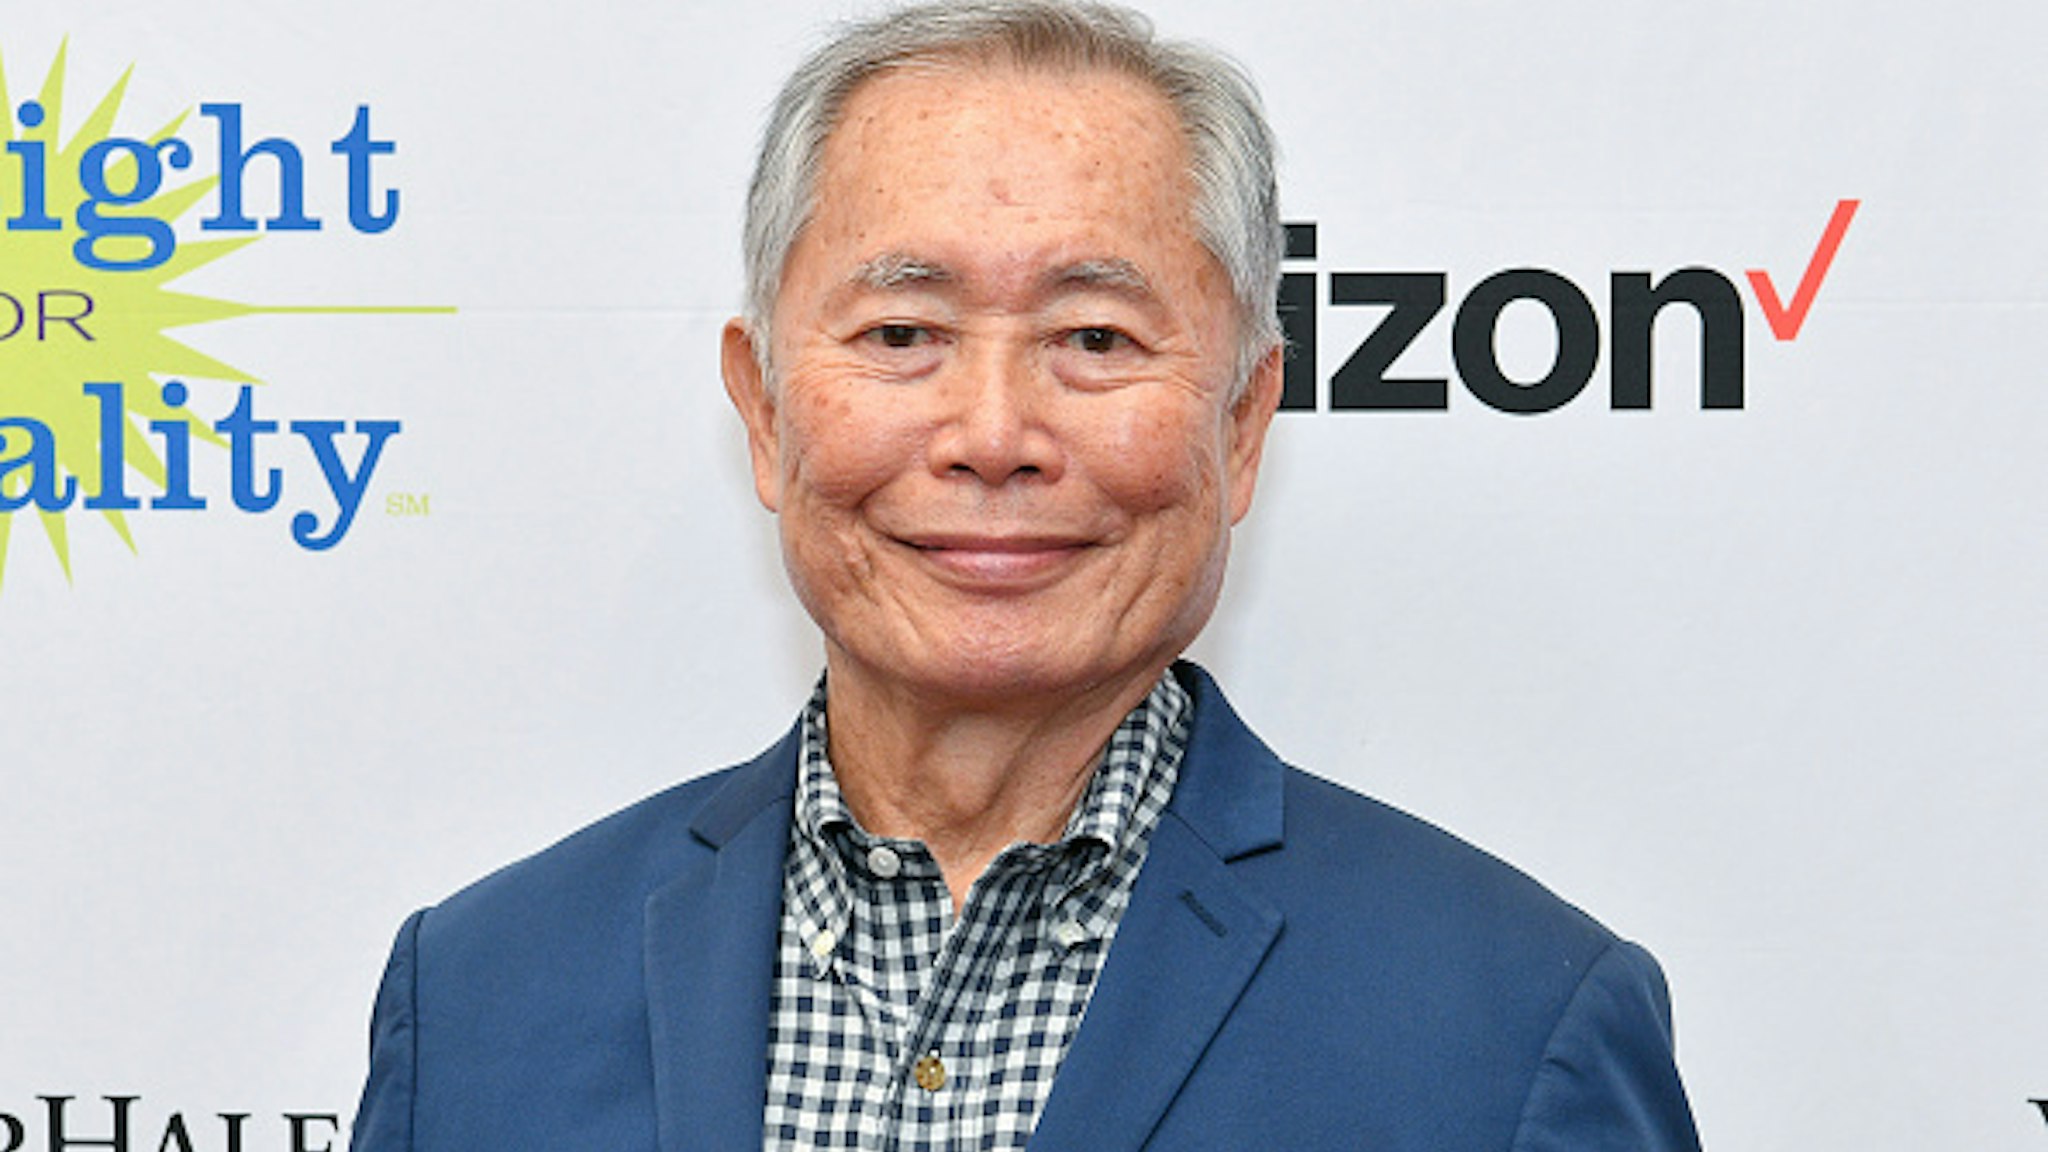 NEW YORK, NEW YORK - NOVEMBER 18: Honoree George Takei attends PFLAG Gives Thanks: Celebrating Inclusion in the Workplace on November 18, 2019 in New York City